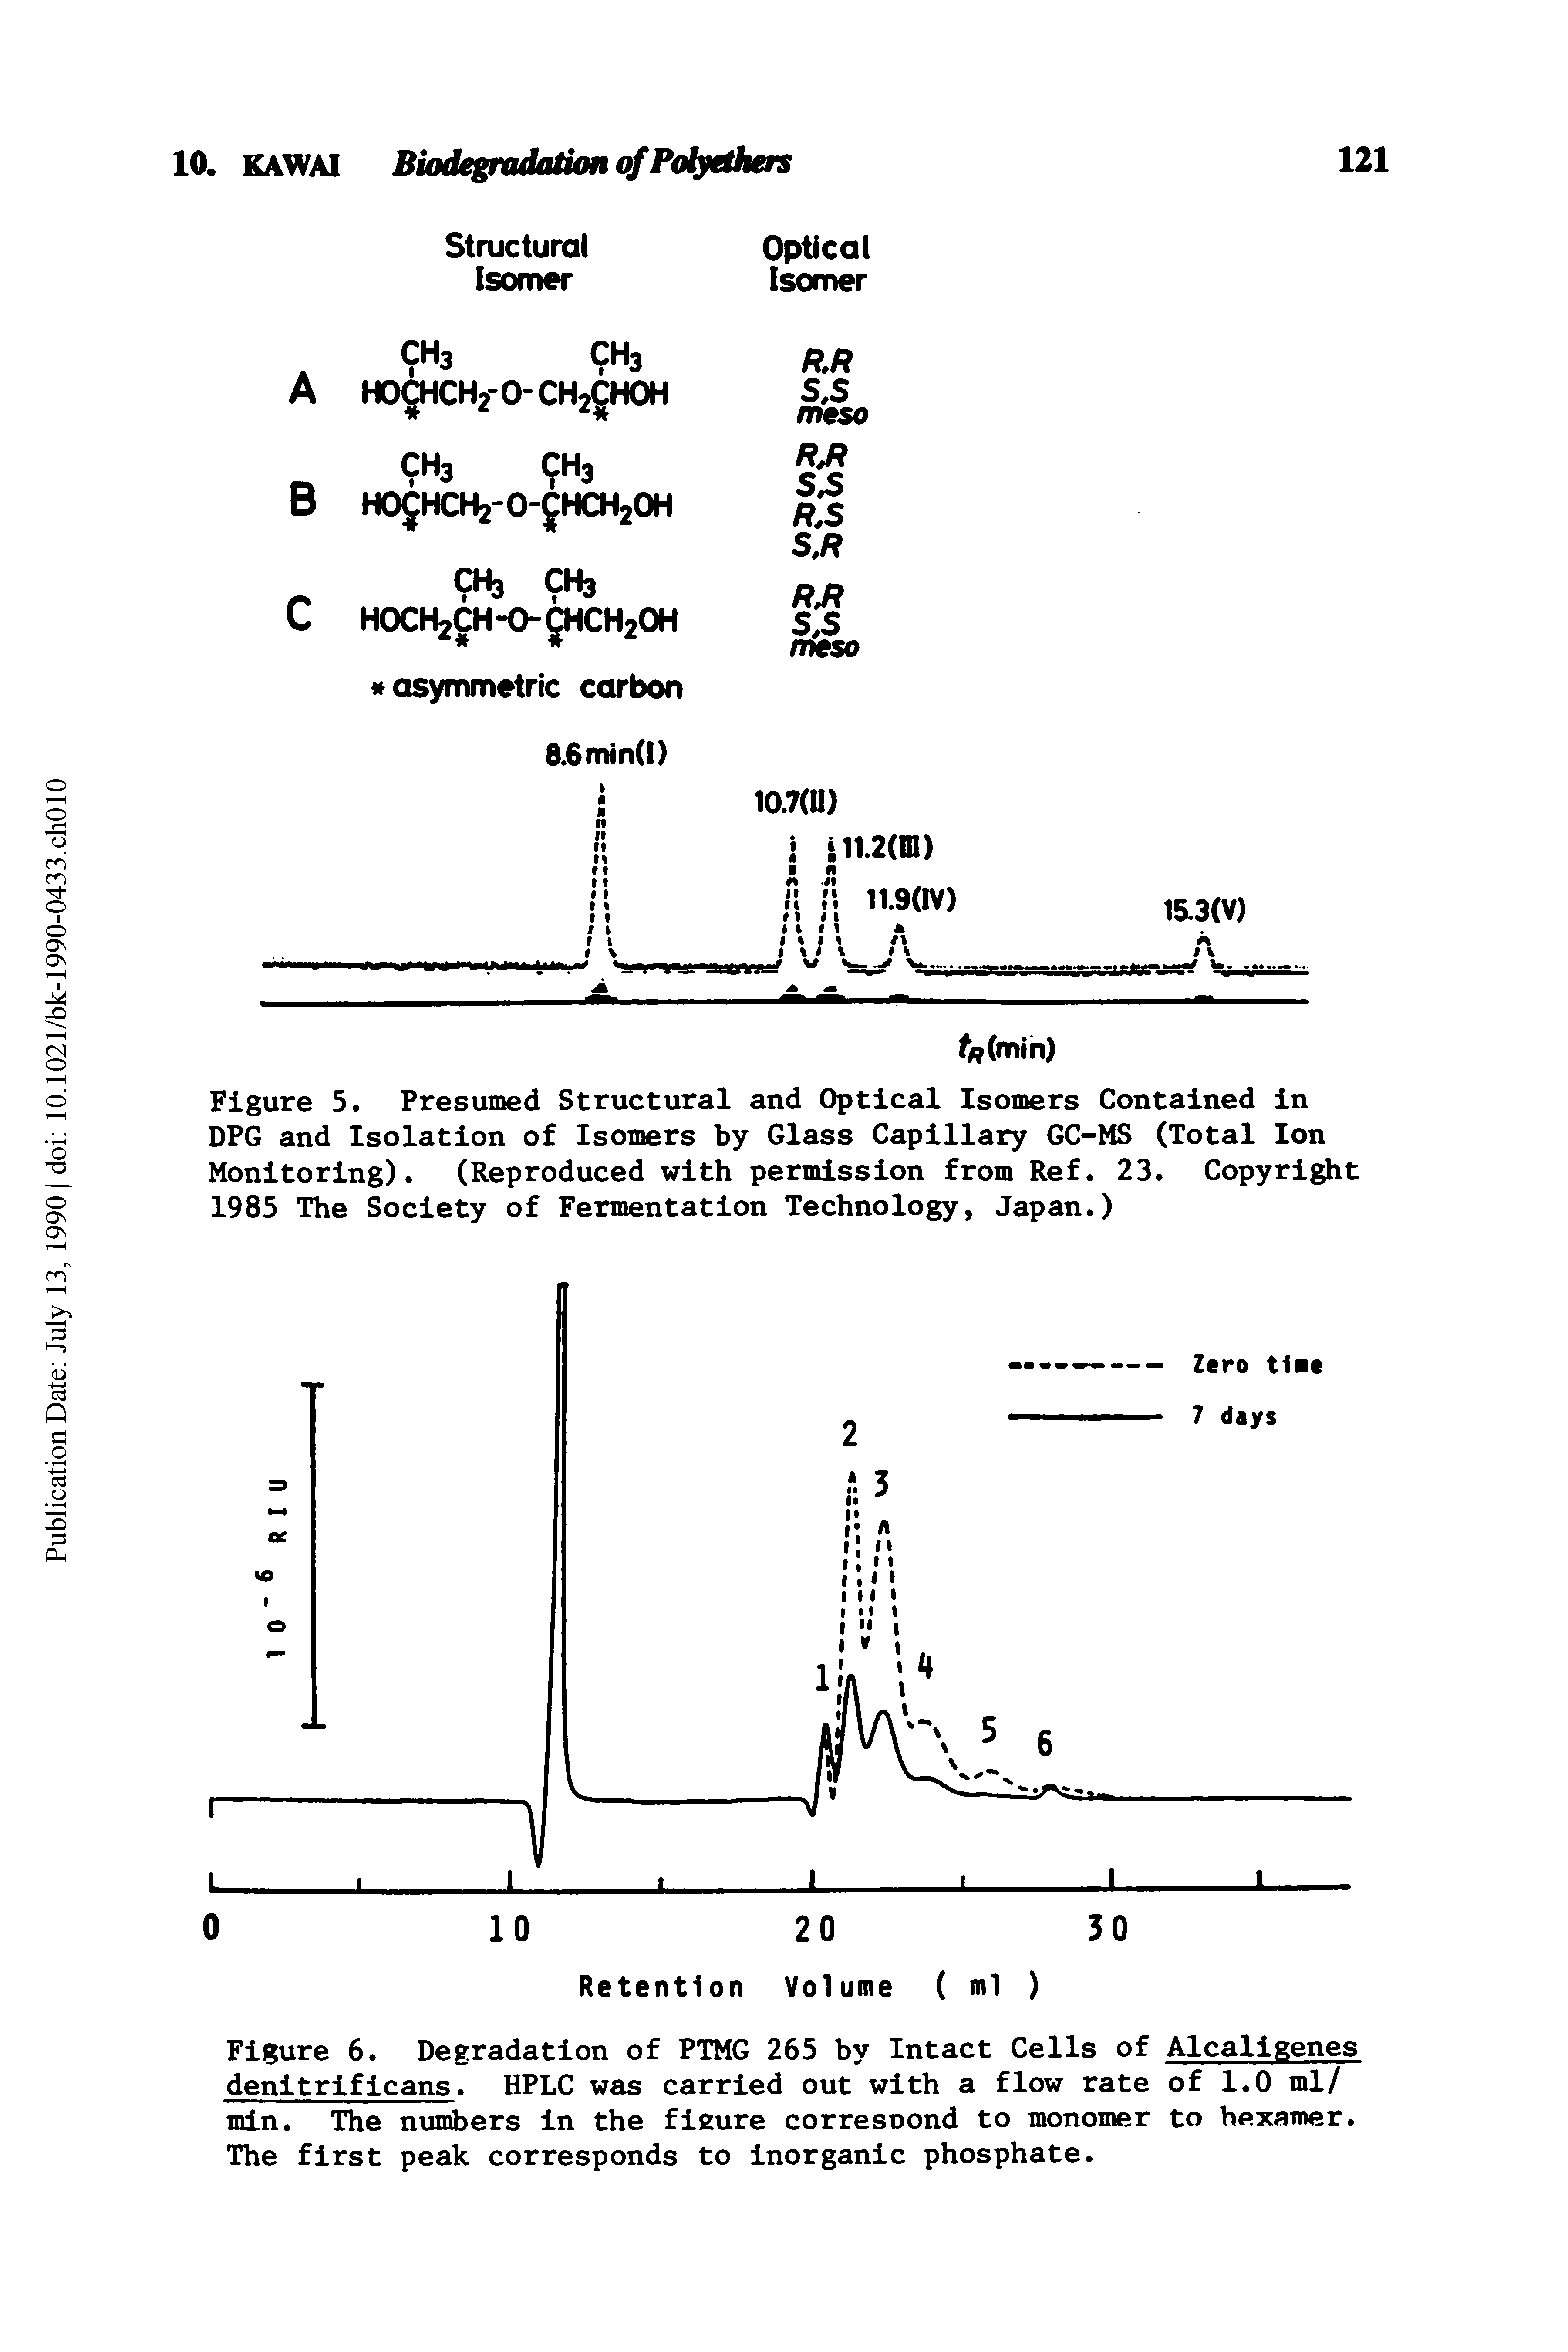 Figure 5. Presumed Structural and Optical Isomers Contained in DPG and Isolation of Isomers by Glass Capillary GC-MS (Total Ion Monitoring). (Reproduced with permission from Ref. 23. Copyright 1985 The Society of Fermentation Technology, Japan.)...